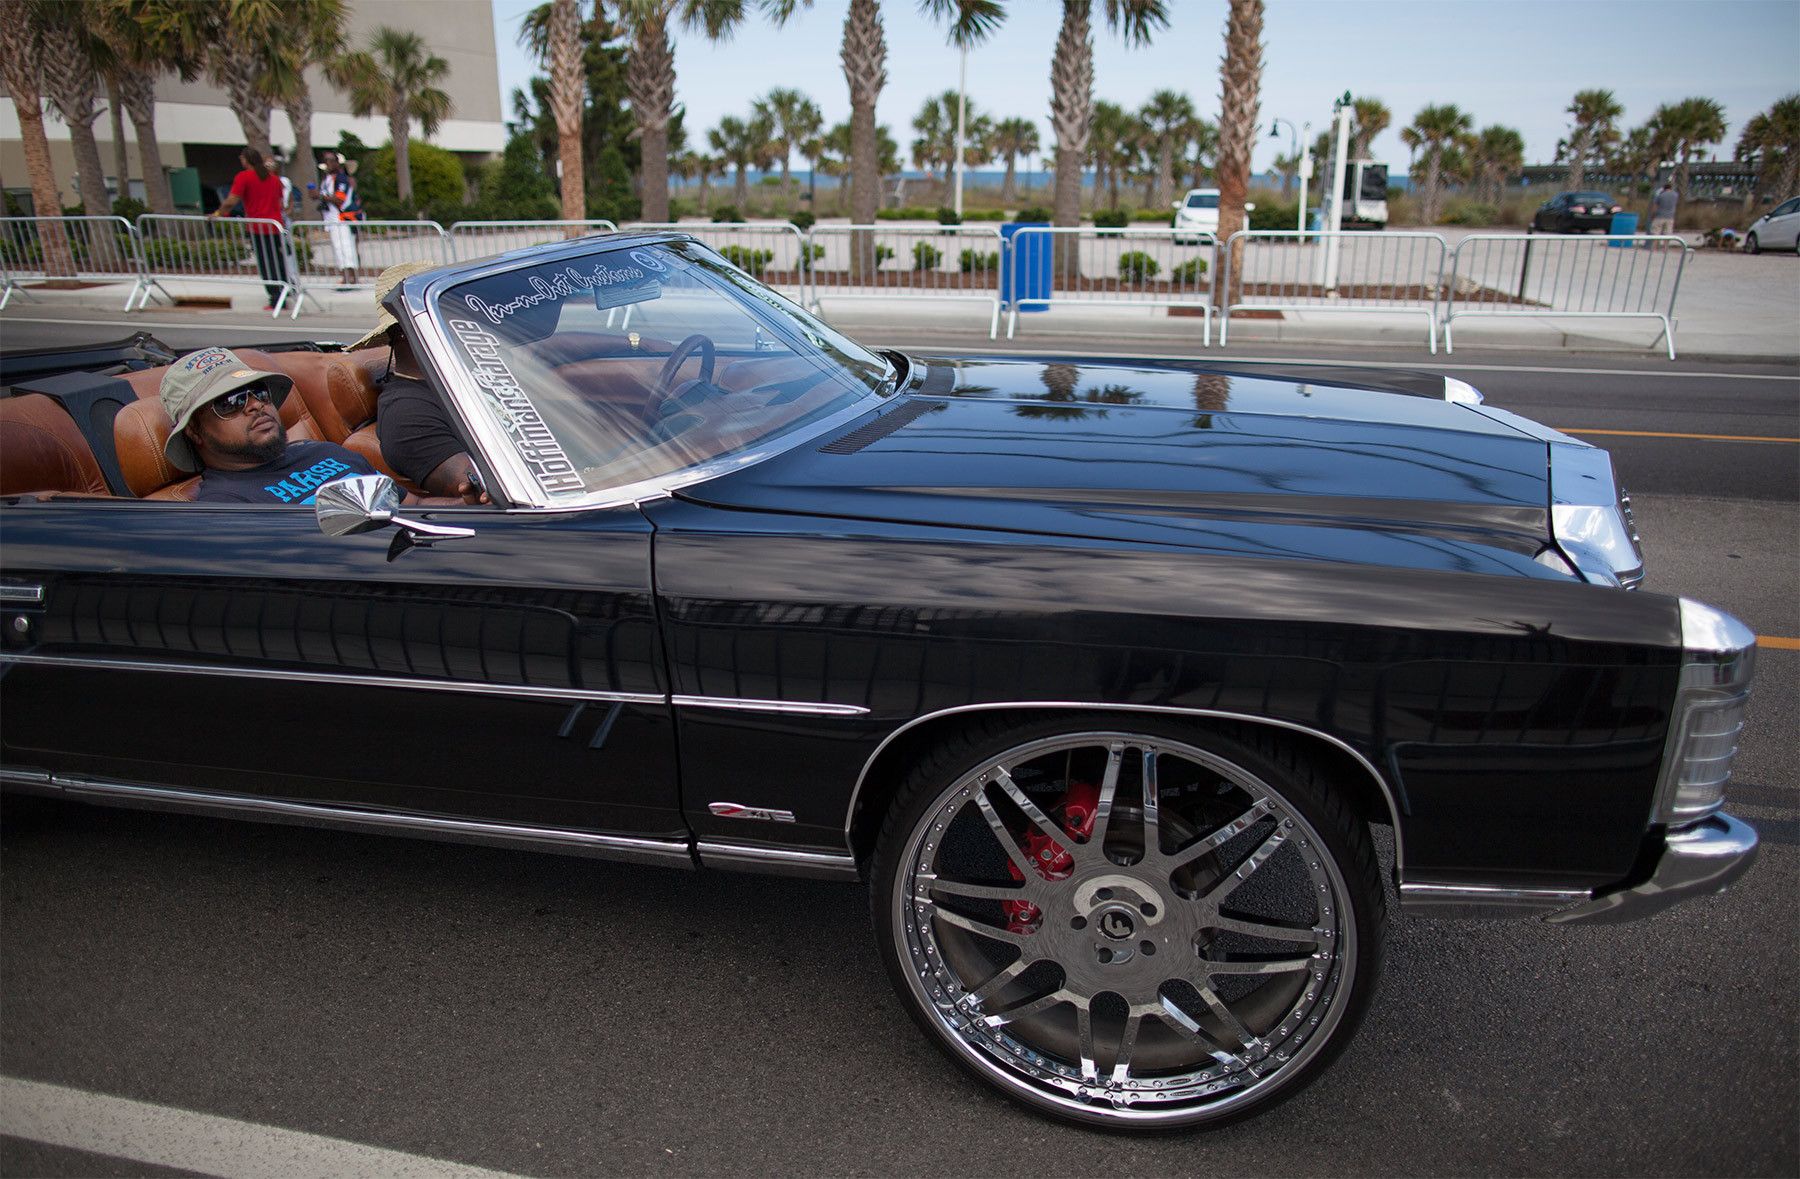 A customized car cruises down Ocean Boulevard during the 2015 Atlantic Beach Memorial Day BikeFest in Myrtle Beach, South Carolina May 22, 2015. After three people were killed and seven wounded in shootings during 2014 Bikefest, State officials called for an end to the event that draws thousands to the family-friendly beach town.Their efforts were unsuccessful. Bikers returned to Myrtle Beach - just a week after a bloody motorcycle gang shootout in Waco, Texas. But this time authorities are more prepared, with dozens of new surveillance cameras and a police force three times the size of last year’s.    REUTERS/Randall Hill